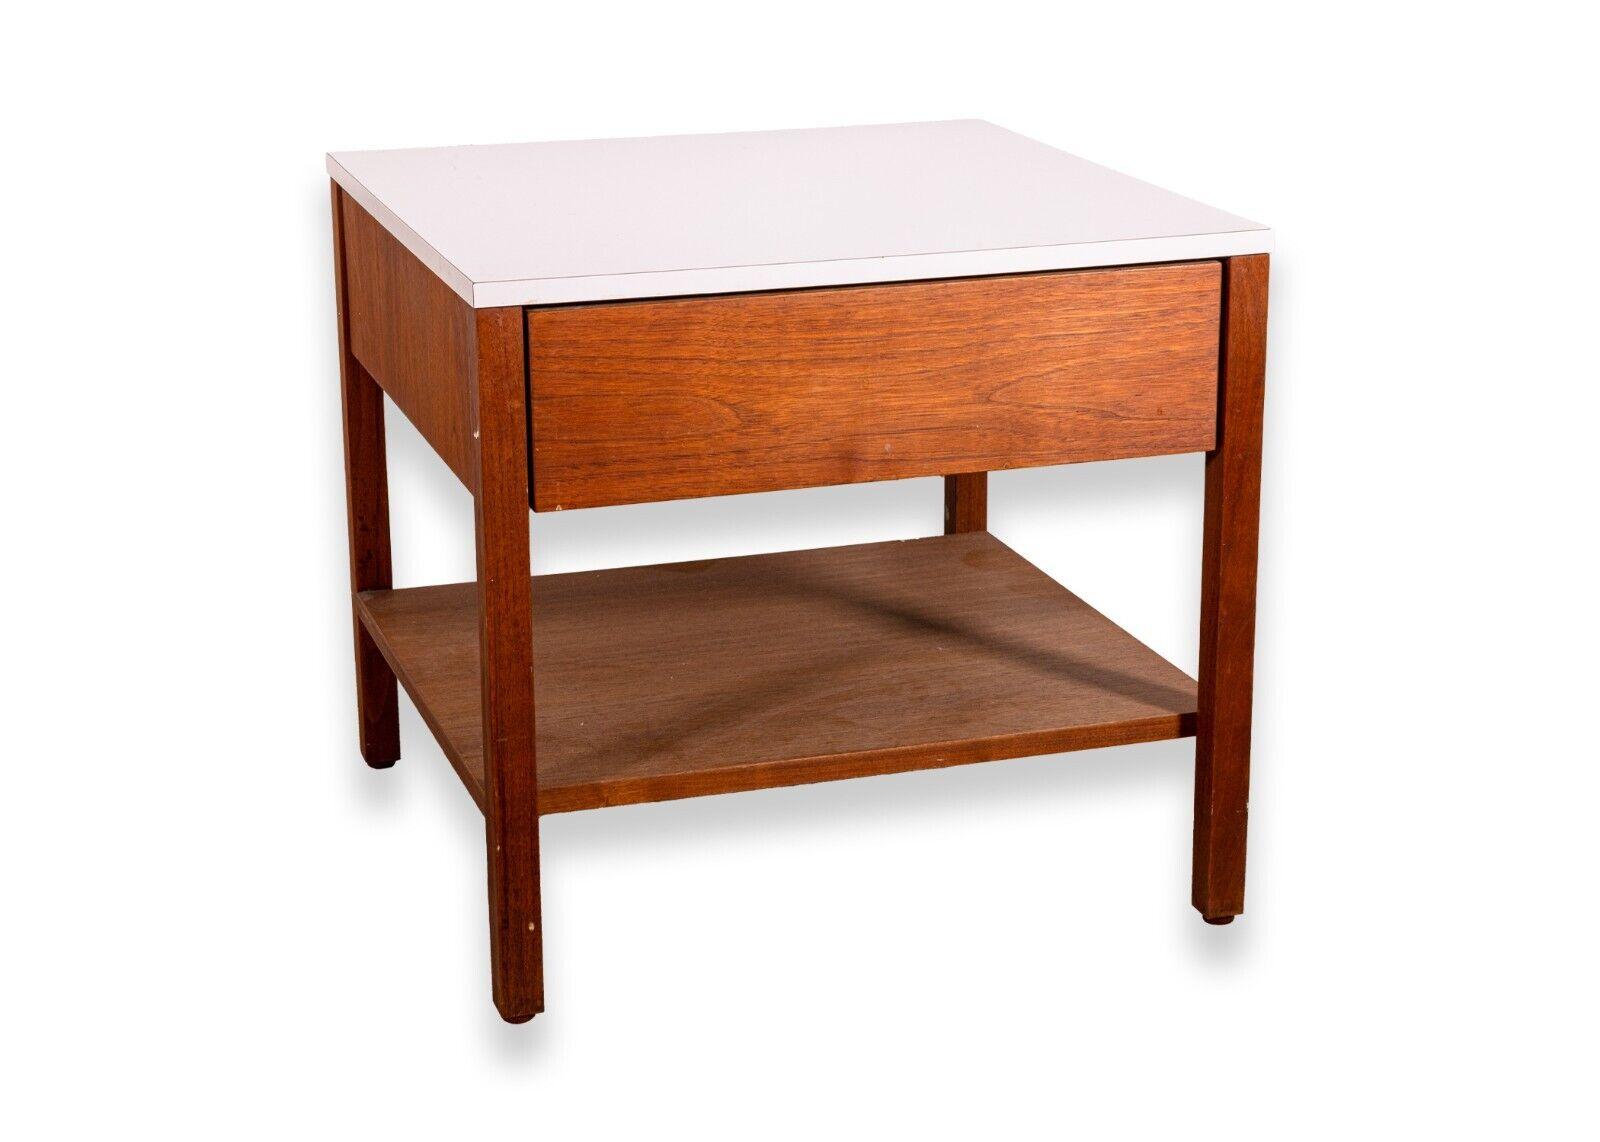 A mid century modern Florence Knoll walnut end table nightstand. This piece features a beautiful walnut wood construction with a table top. This piece has a single drawer with ample storage space, and also features a unique tissue box holder.